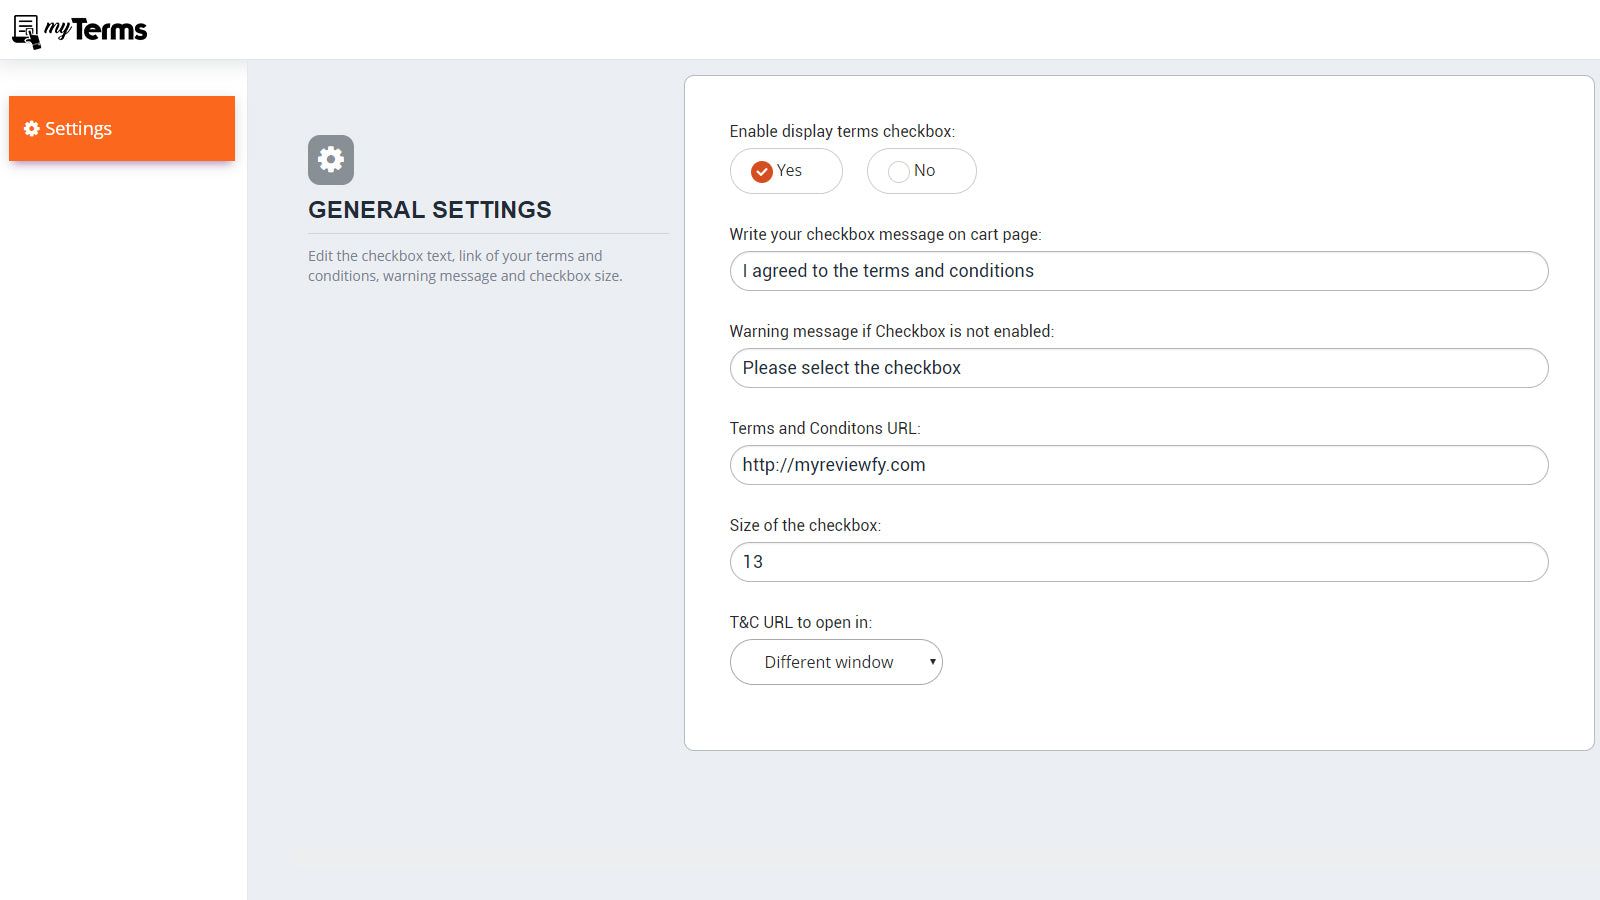 ShopTerms - terms & conditions checkbox layout settings